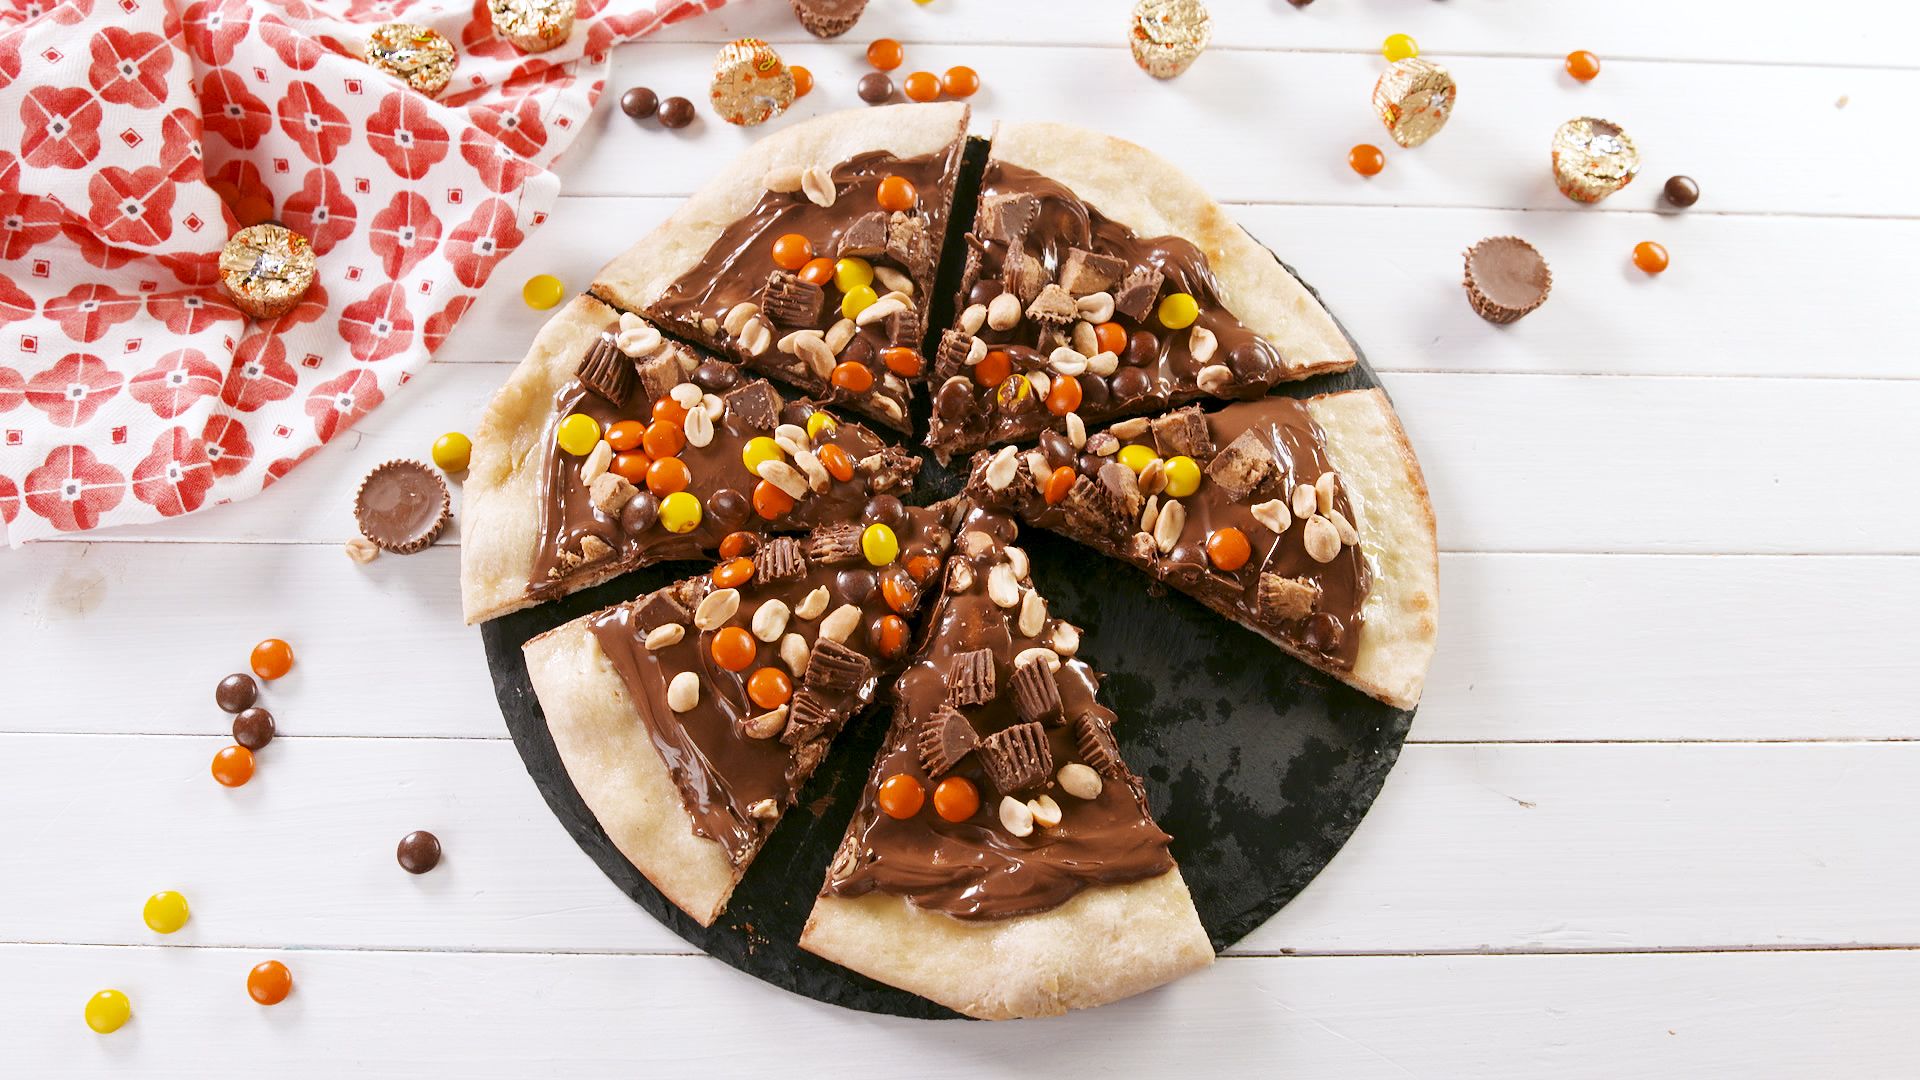 Best Chocolate Pizza Recipe - How To Make Chocolate Pizza